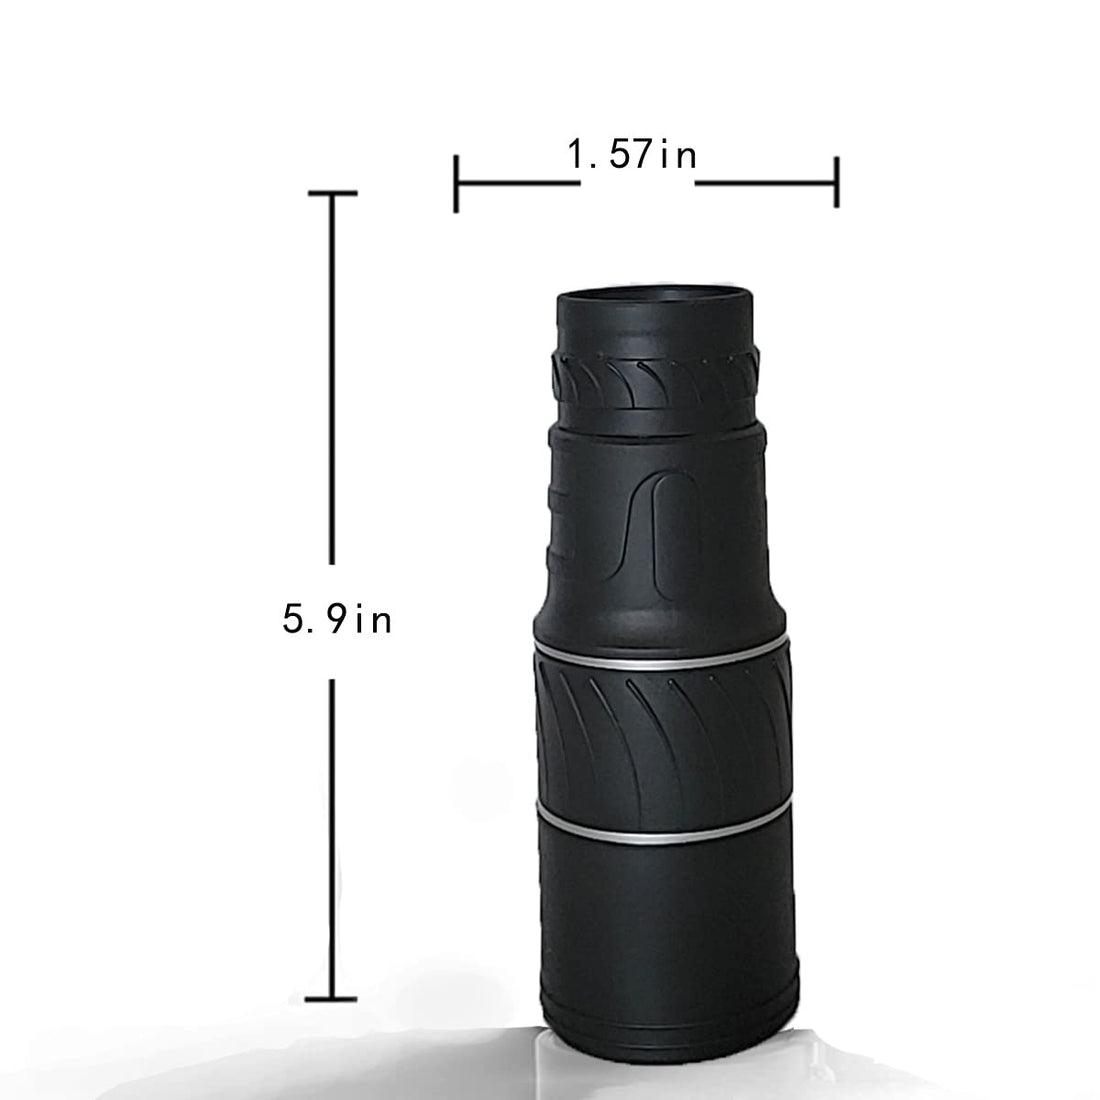 Akingshop Monocular Telescope, 8x40 Waterproof Monocular with Smartphone Holder & Tripod, Clear FMC BAK4 Prism Pocket Telescope, Great for Birds Watching, Wildlife, Hunting, Camping, Hiking, Tourism